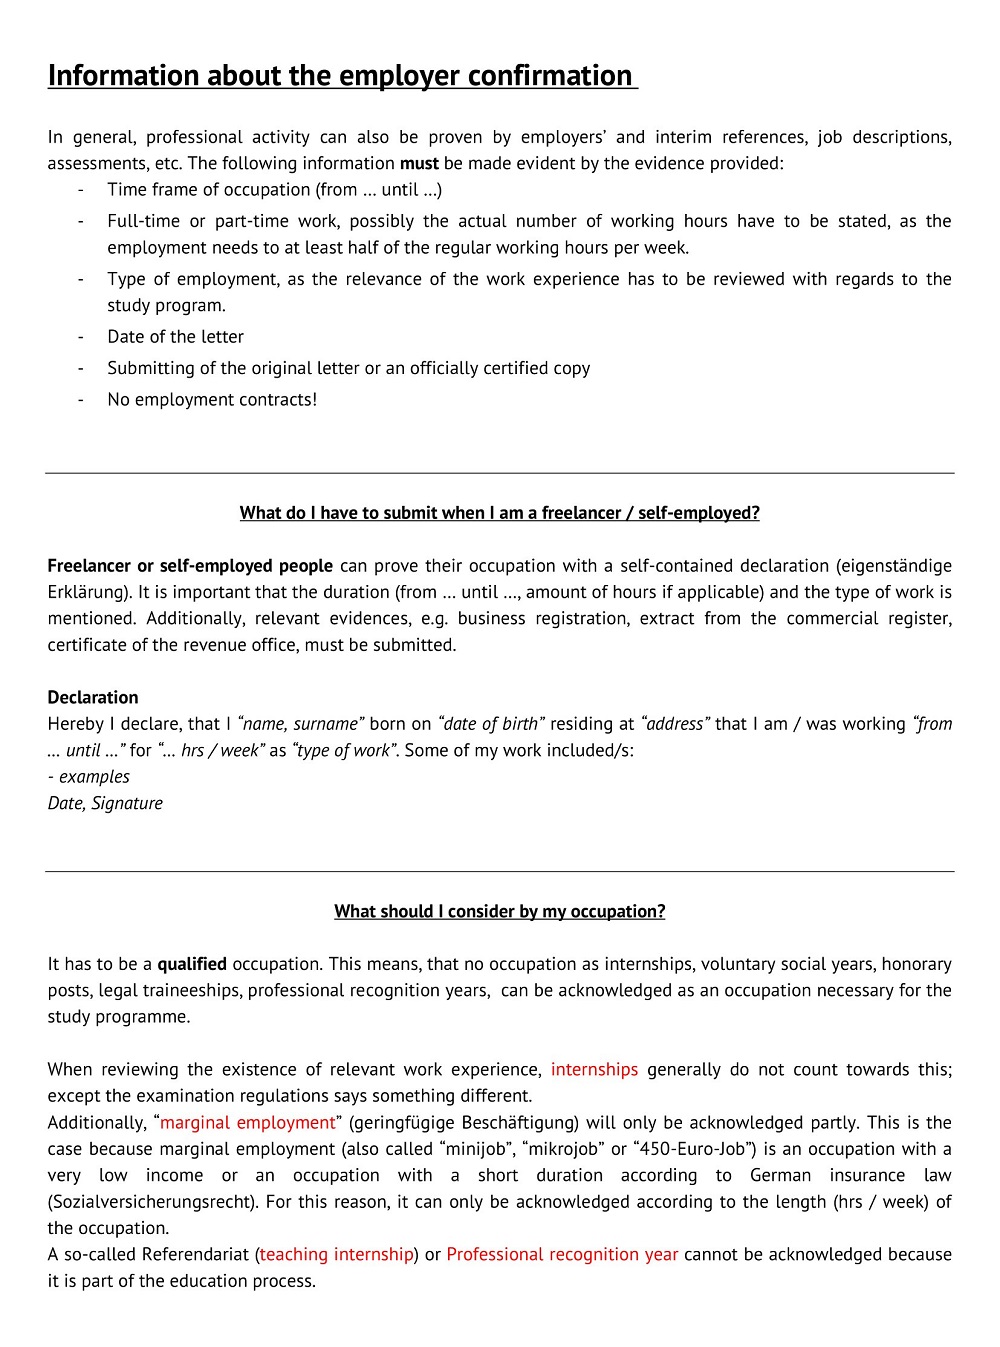 Letter of Employer Confirmation Template